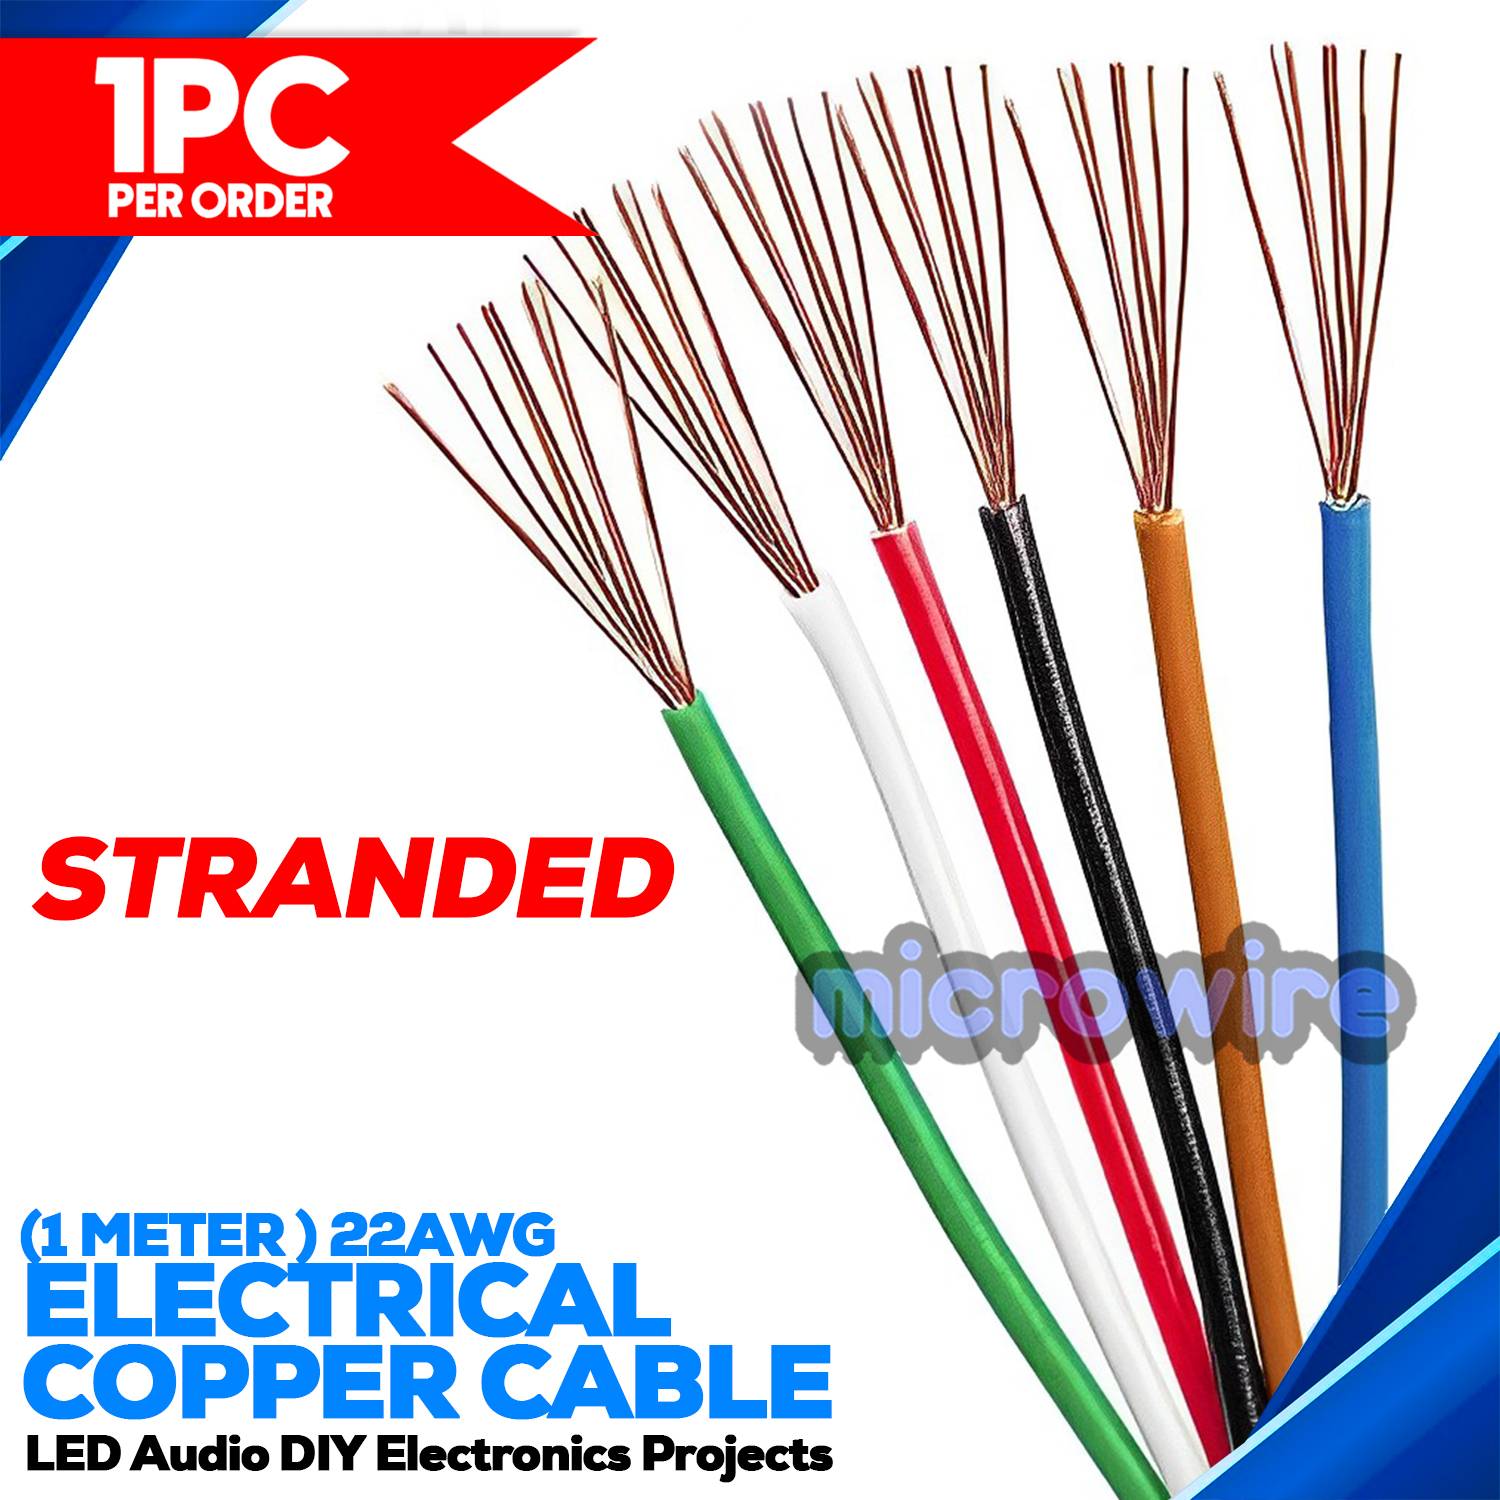 Stranded Wire 22 AWG for DIY Electronics Projects